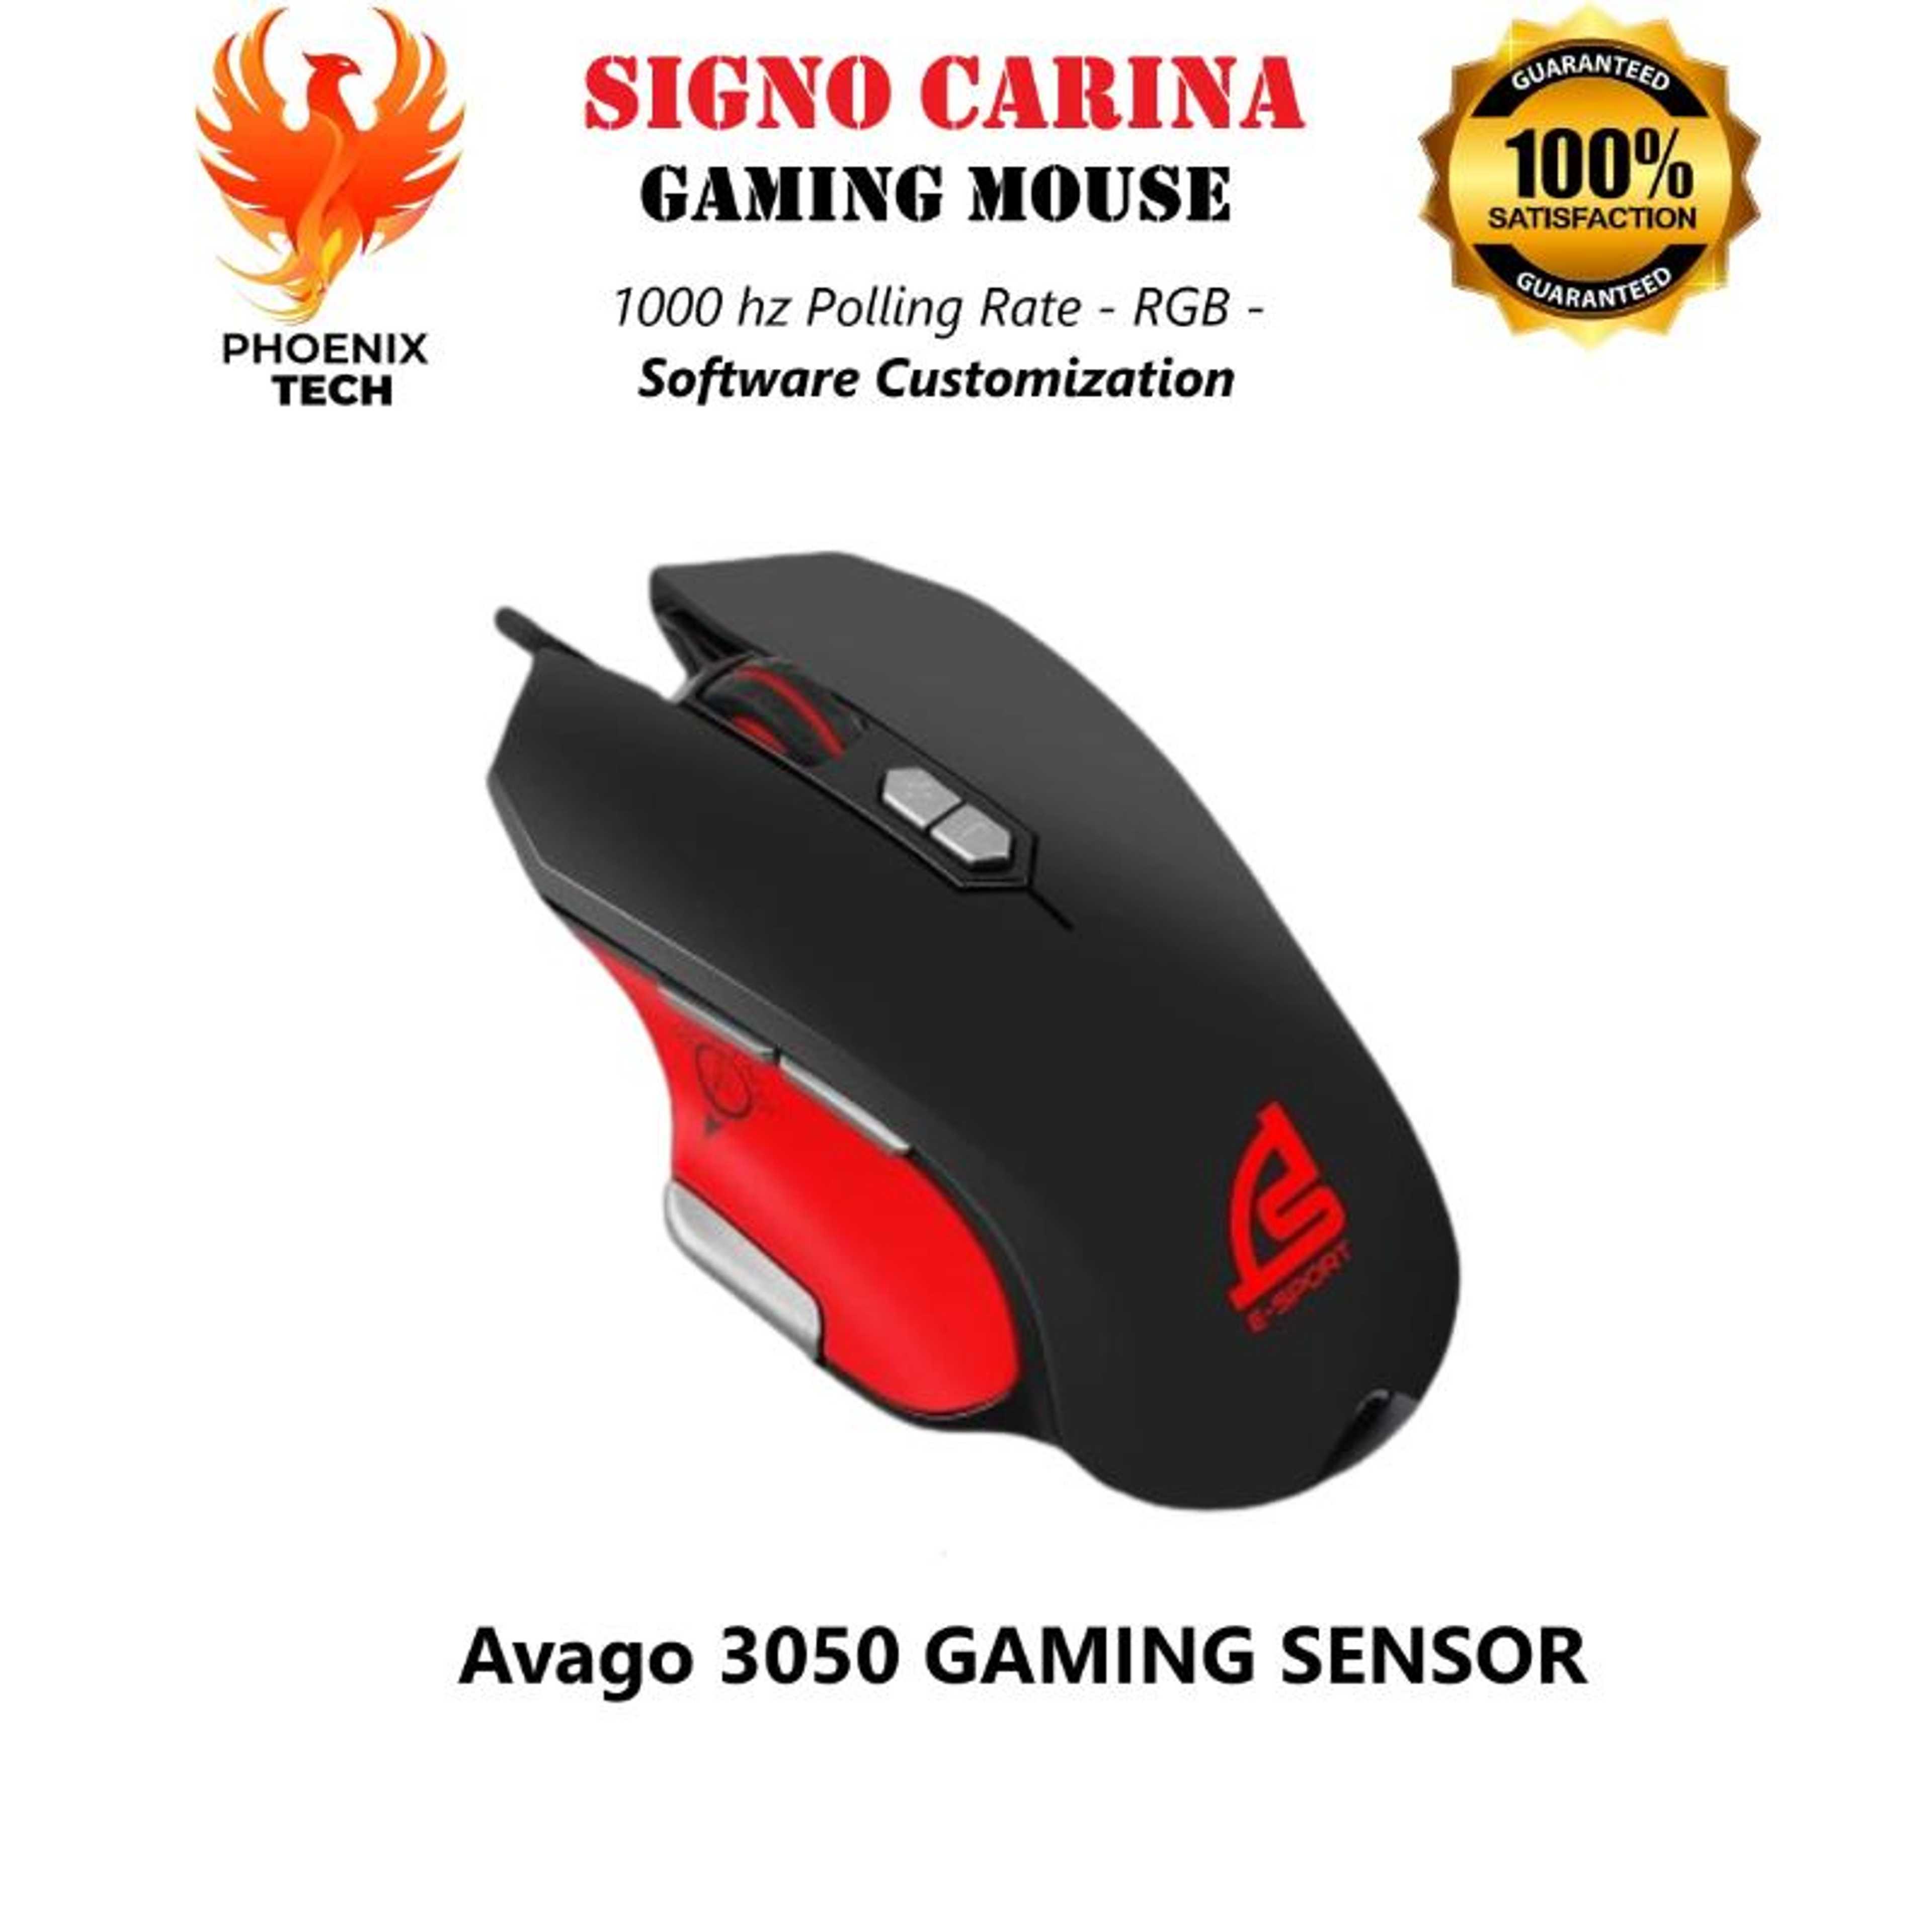 SIGNO Carina USB Gaming Mouse Wired Ergonomic Design 16.8 Million RGB Lighting Real 1000-4000 DPI 6 Programmable Bottons PC And MAC For Windows 7/8/10/VISTA (GM-917)